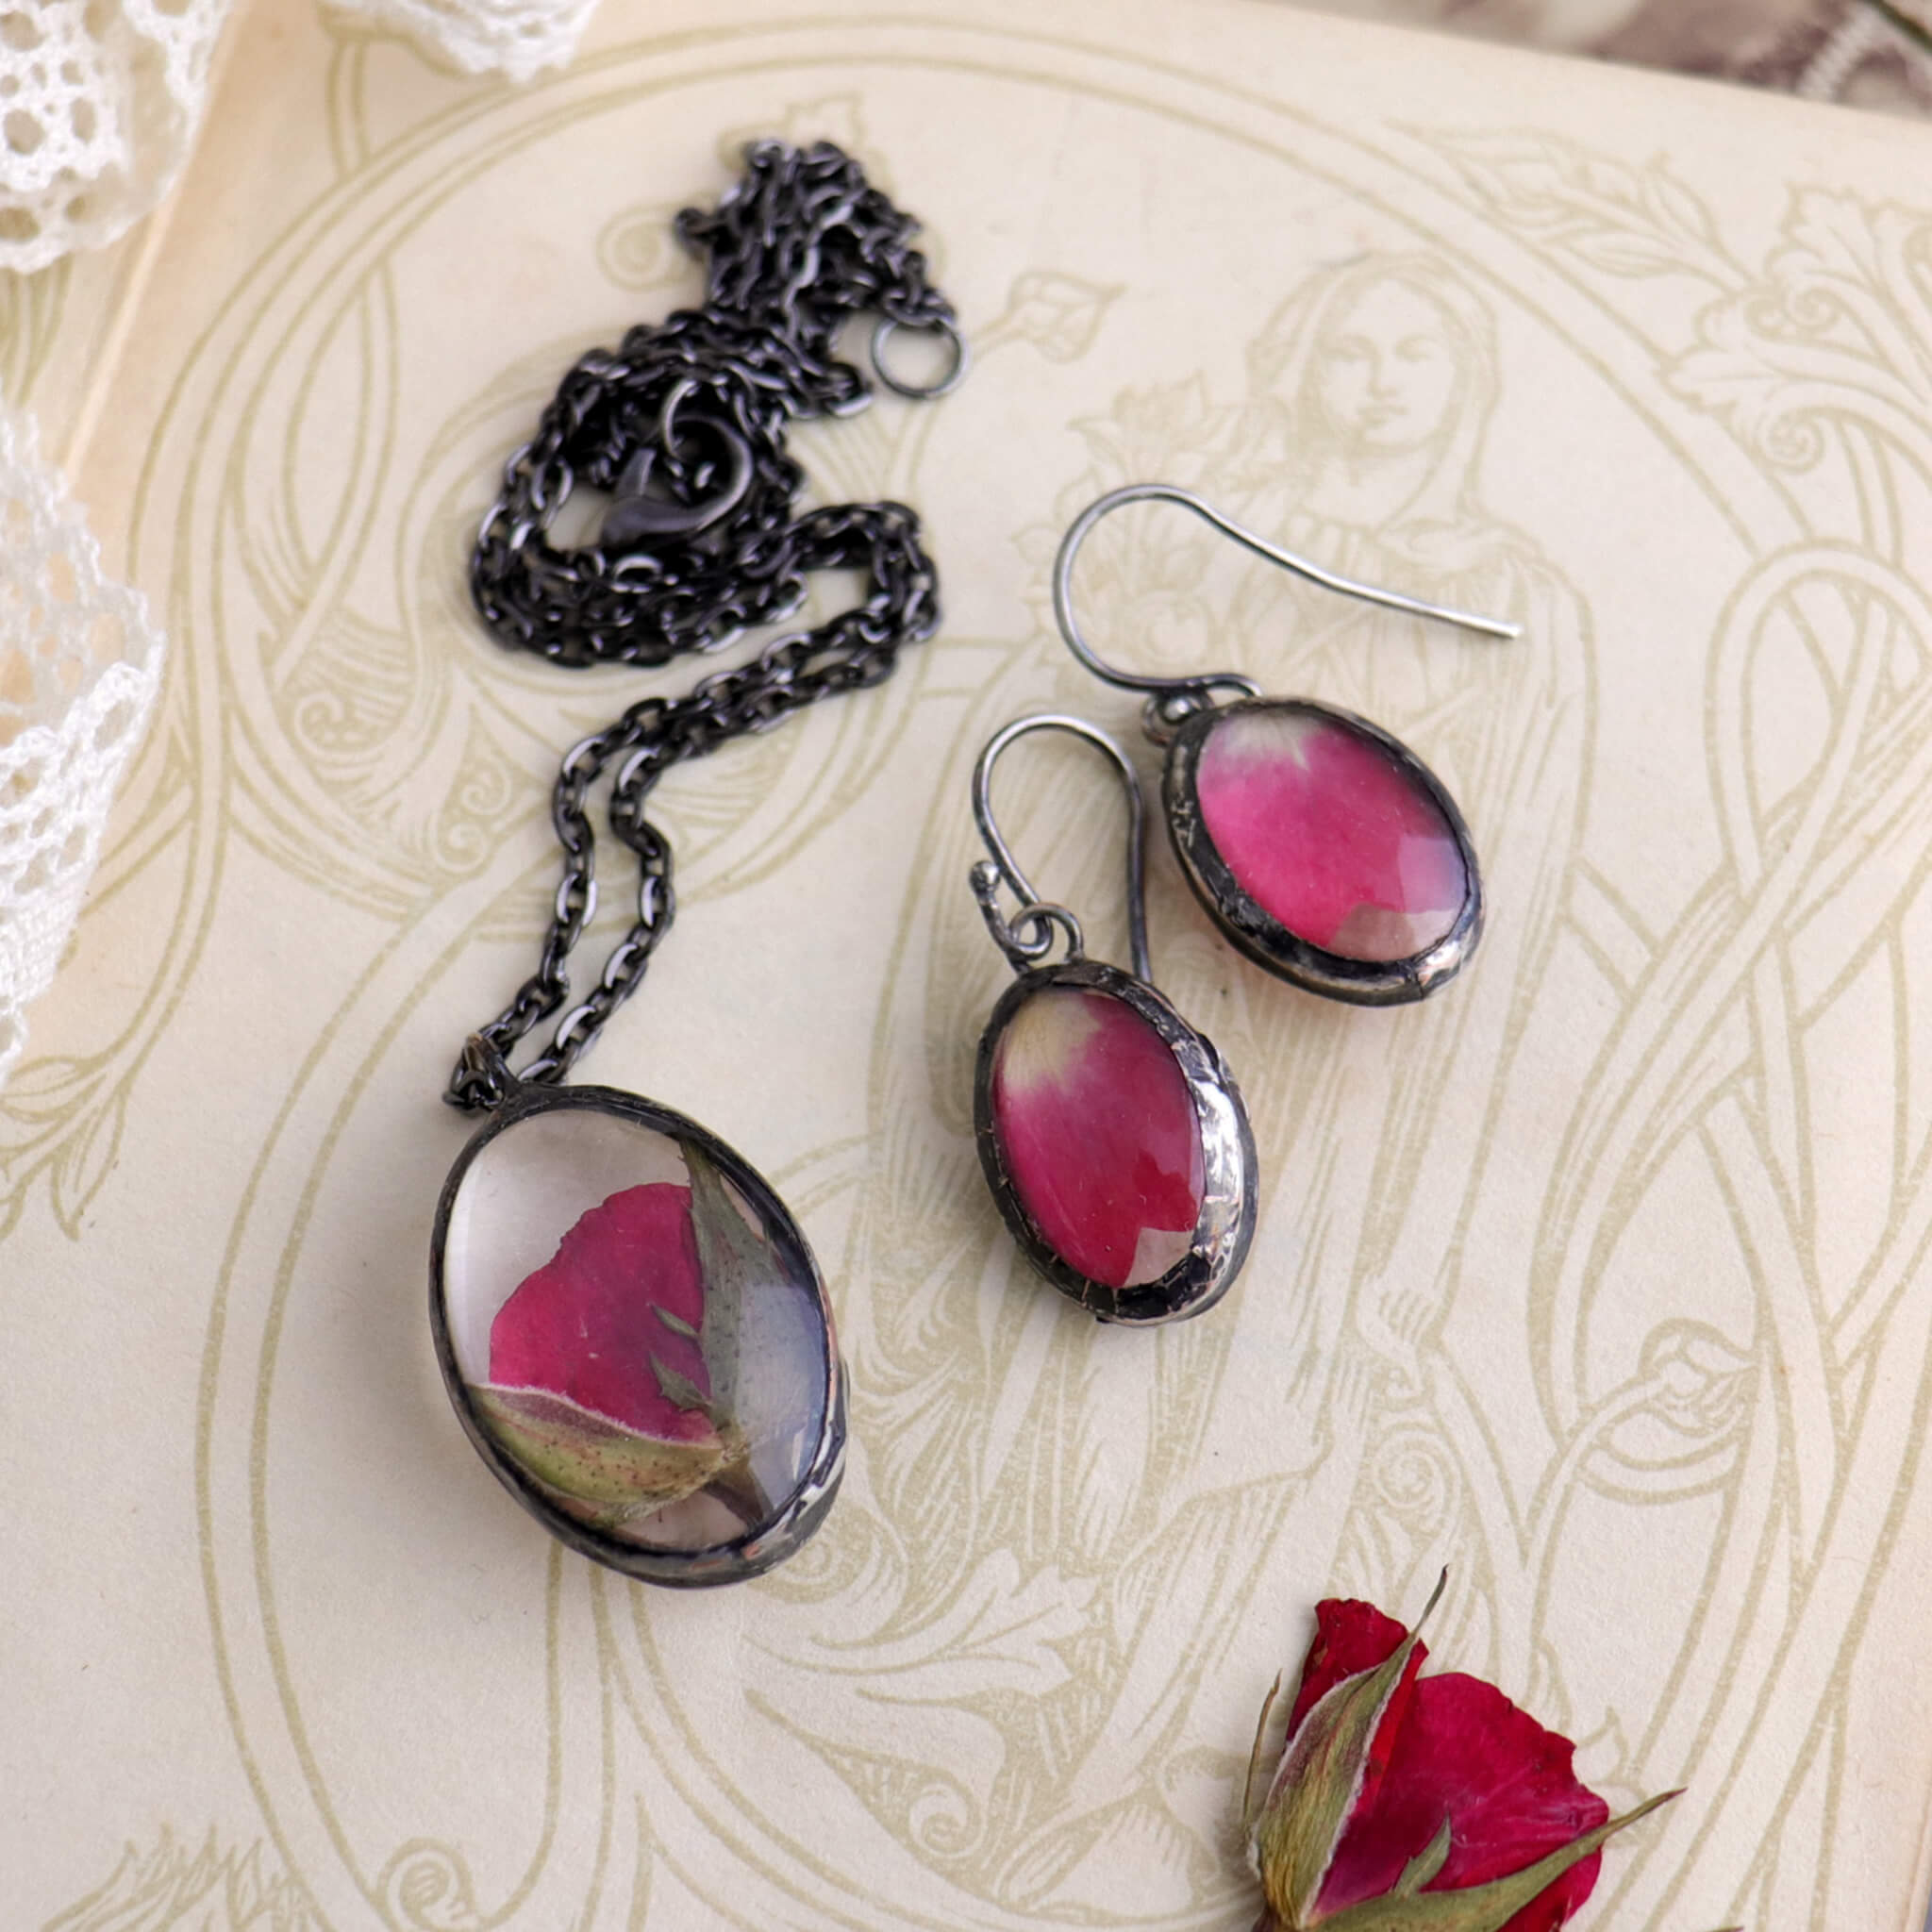 Rose petal necklace and earrings lying on an old book